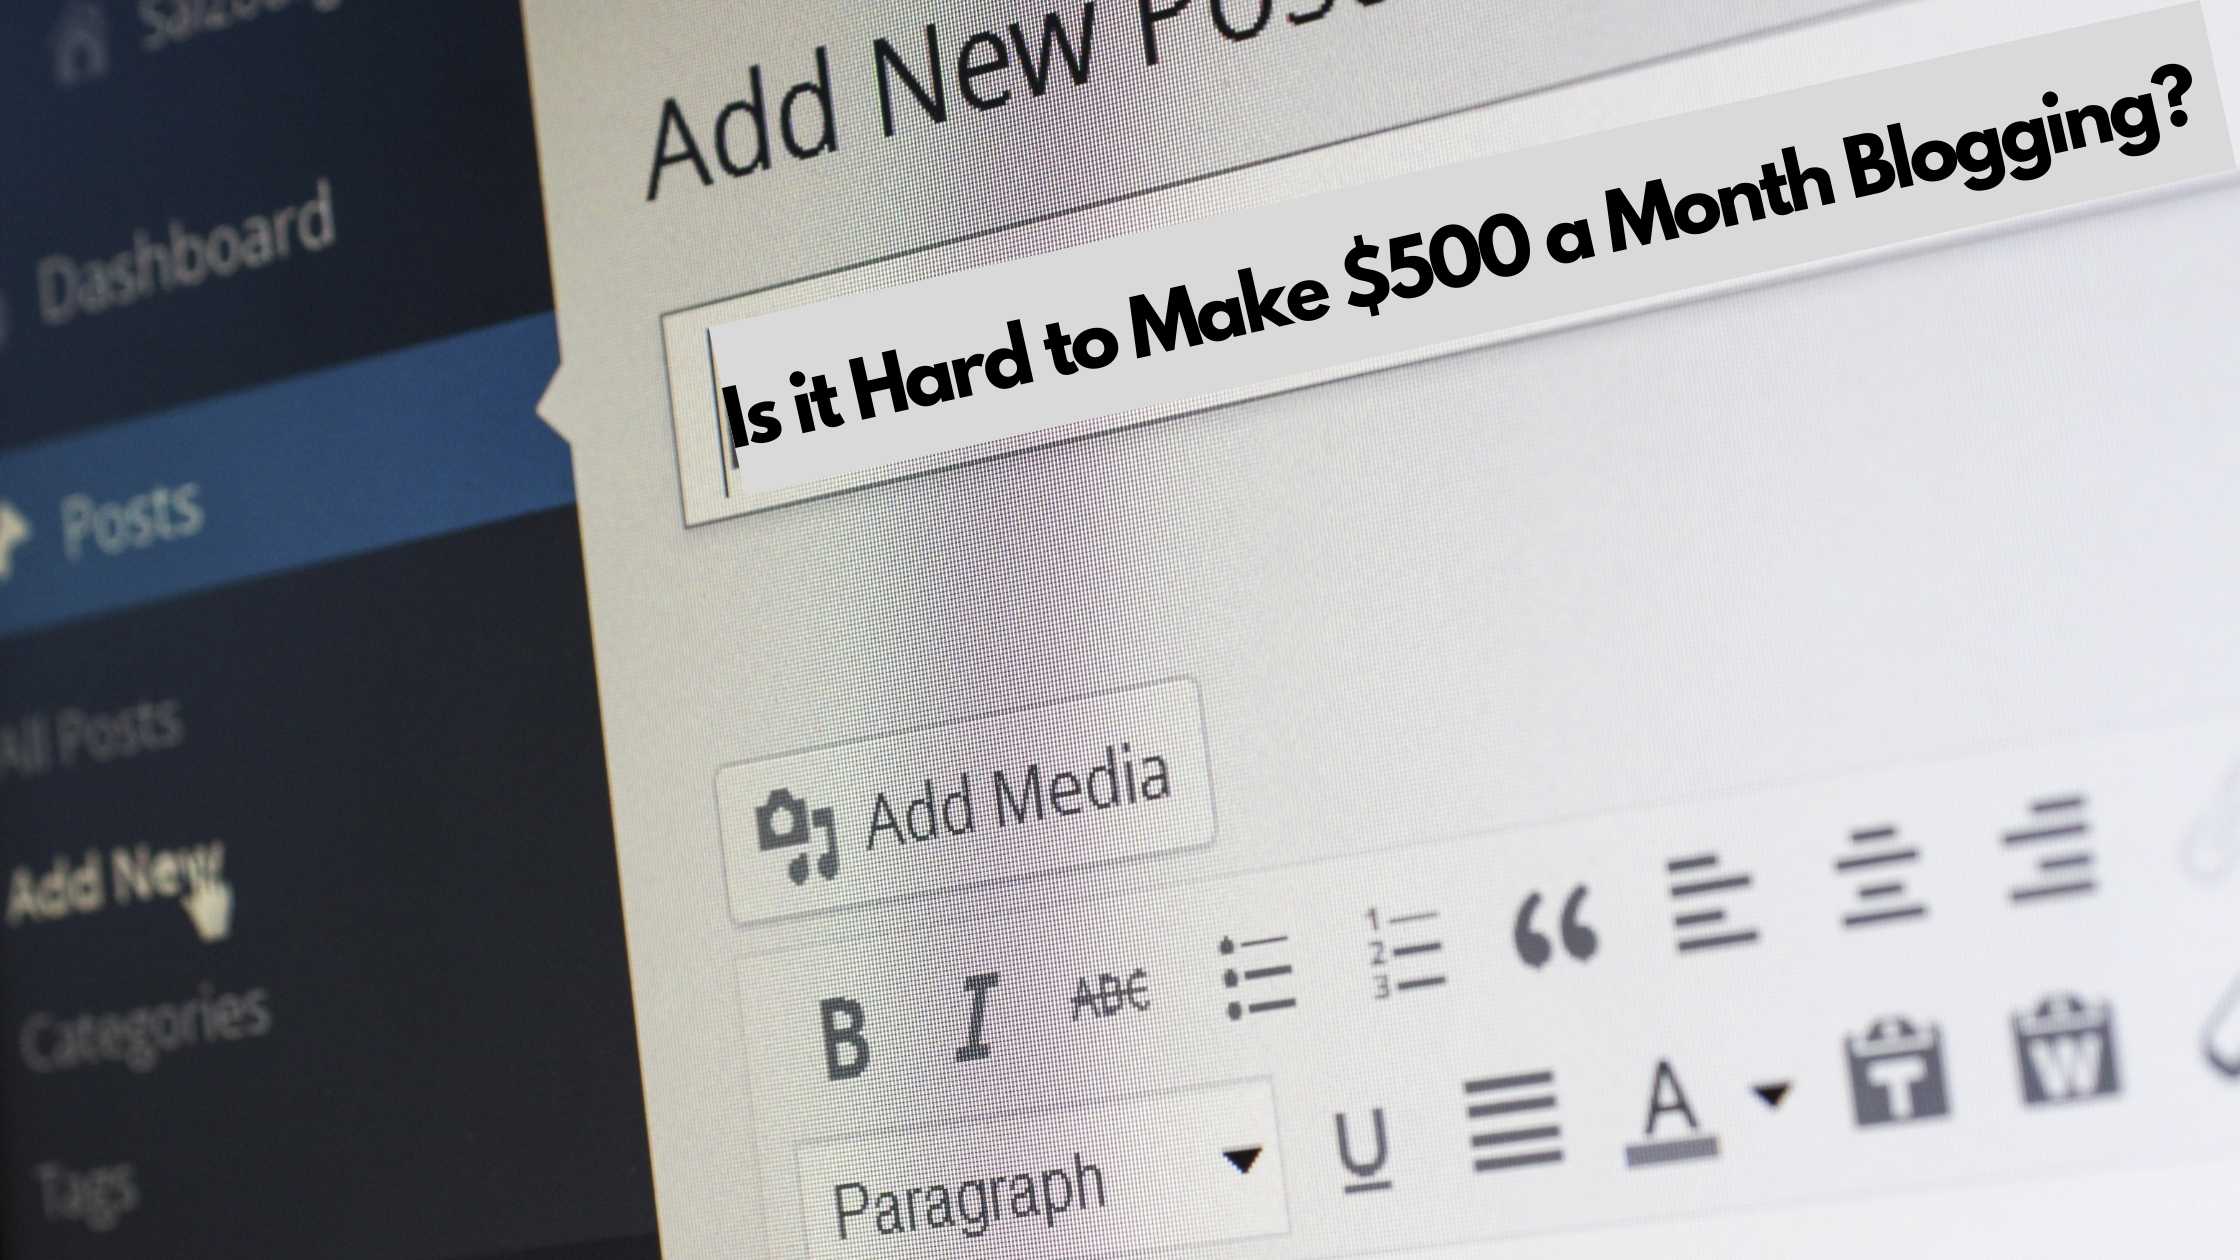 Is It Hard to Make $500 a Month Blogging?